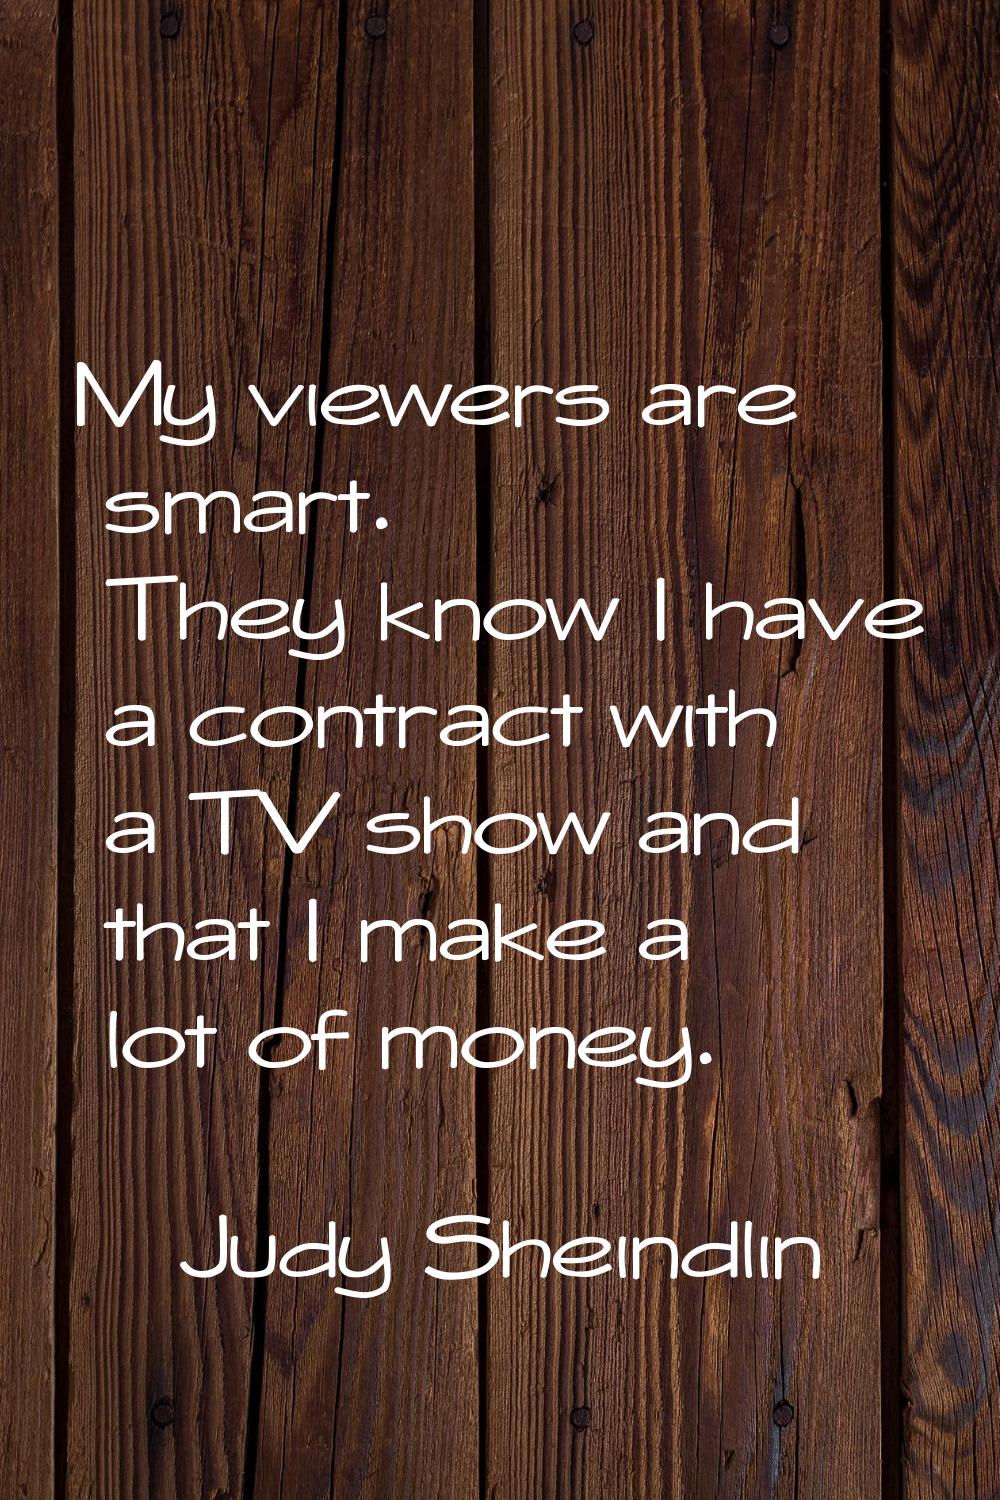 My viewers are smart. They know I have a contract with a TV show and that I make a lot of money.